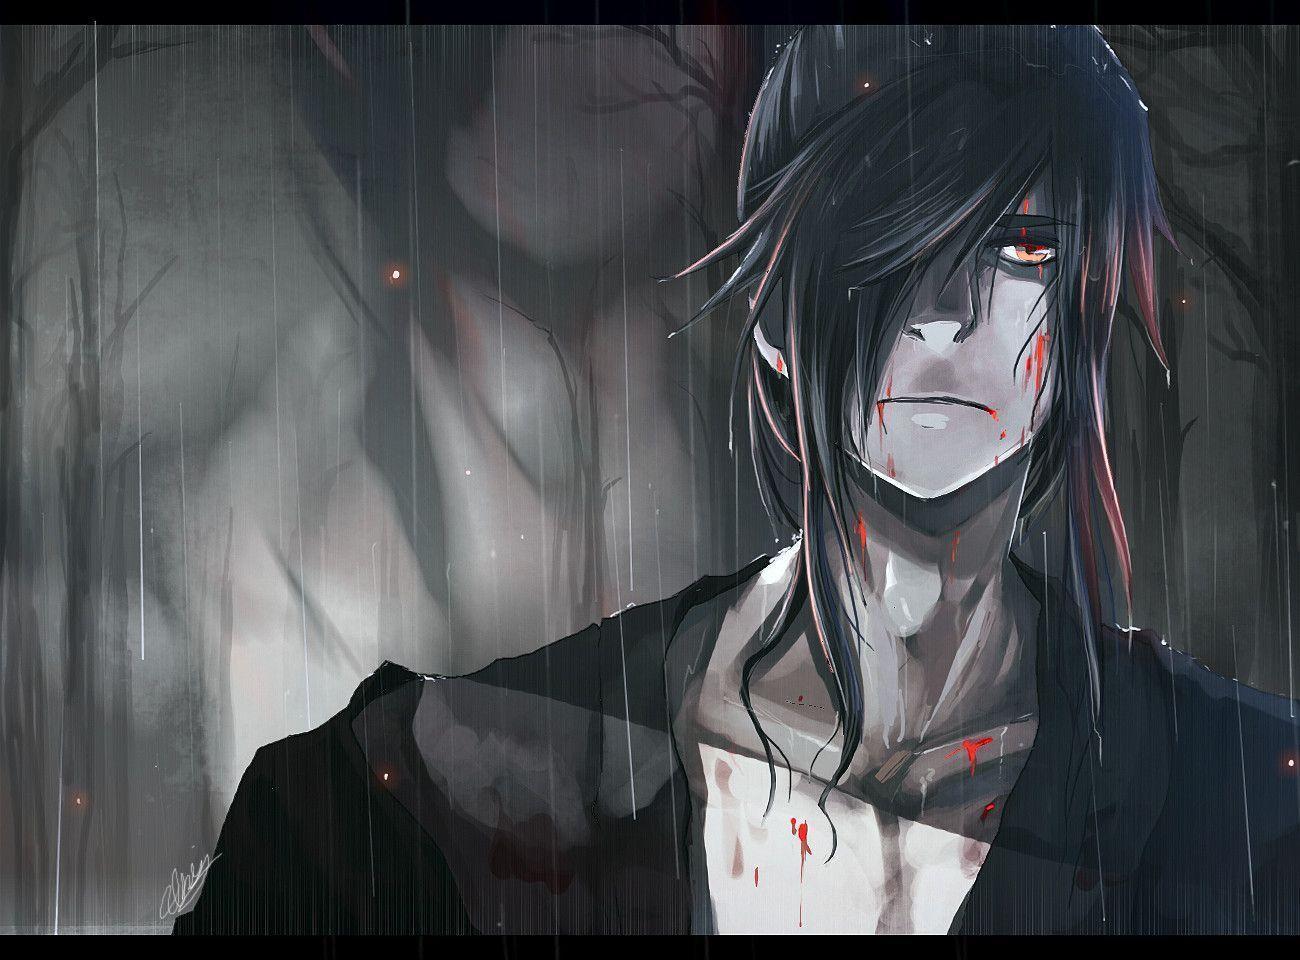 Emo Anime Wallpapers Wallpaper Cave